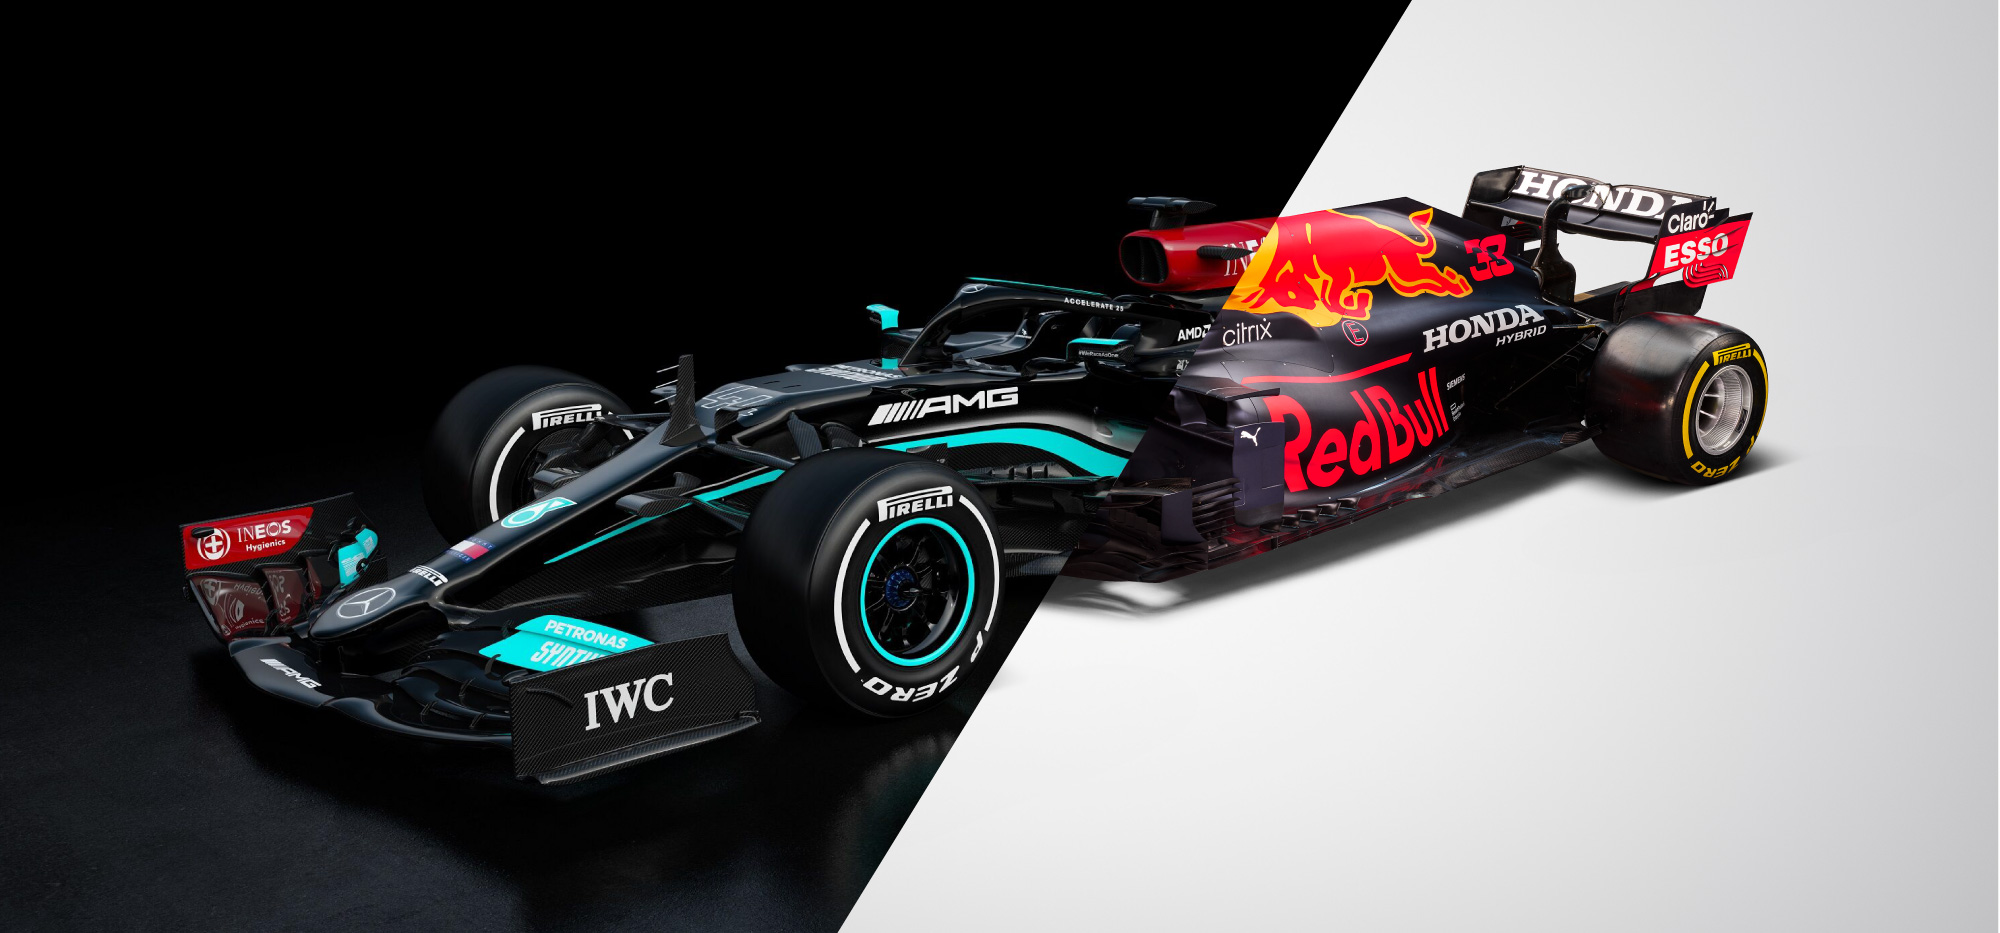 Mercedes and Red Bull F1 cars